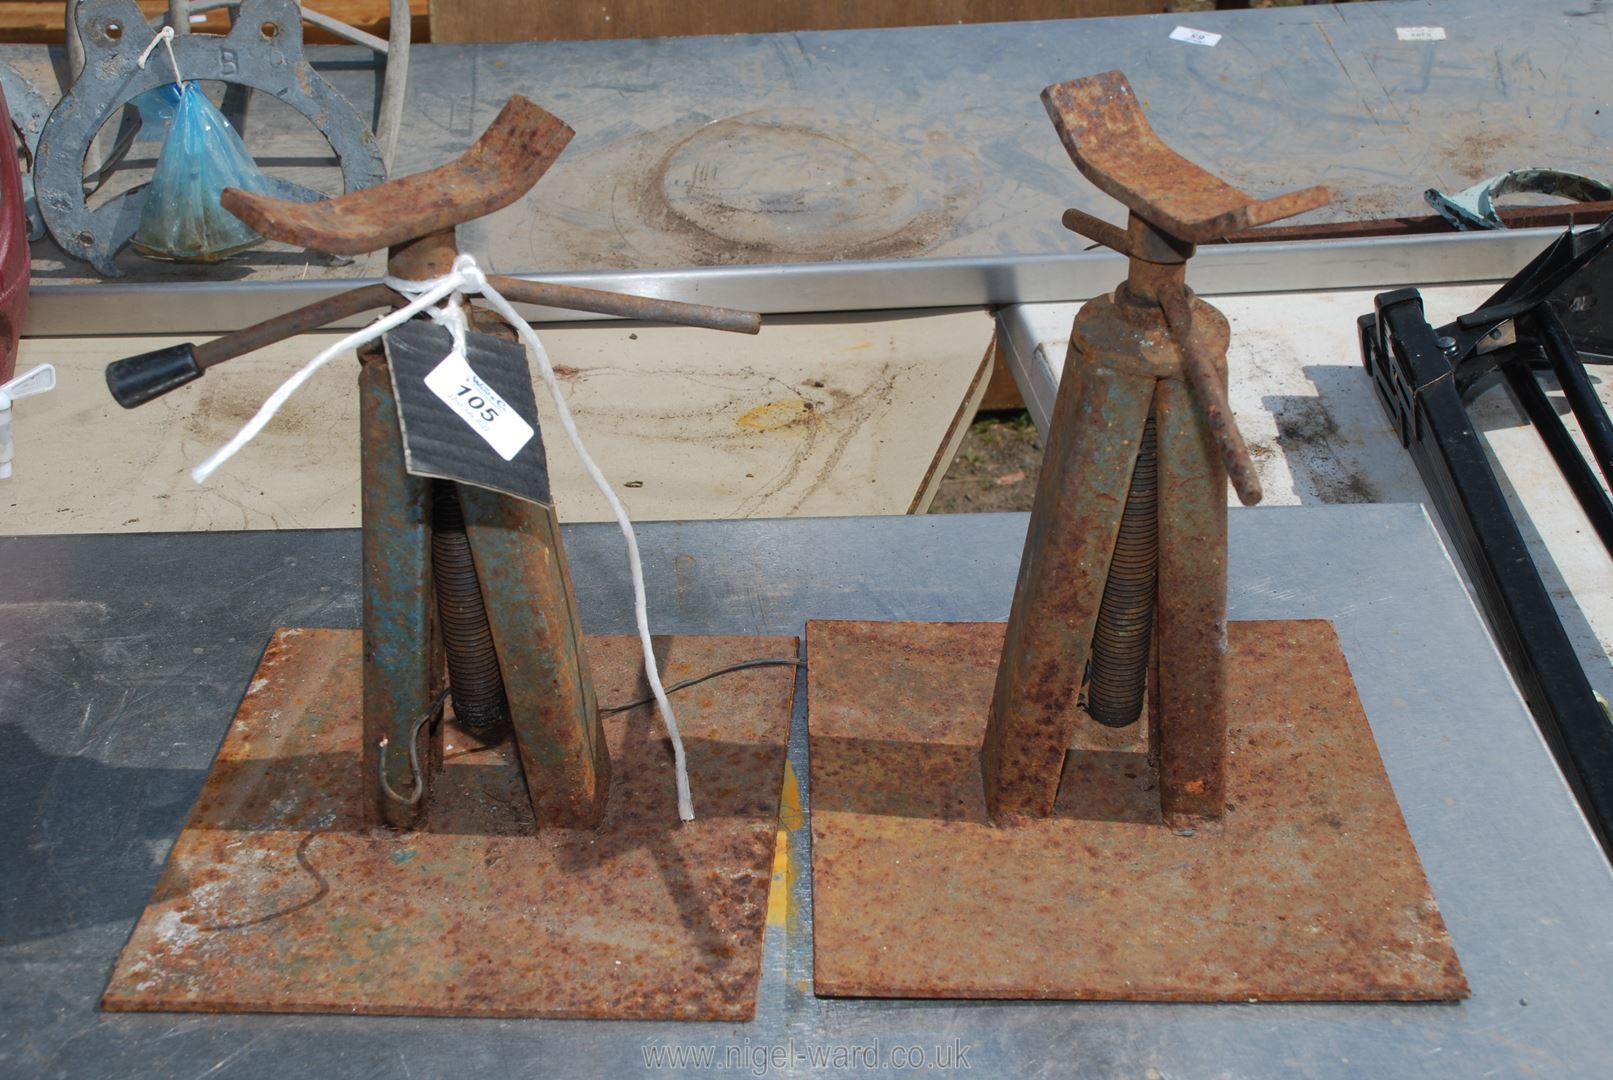 A pair of axle stands.